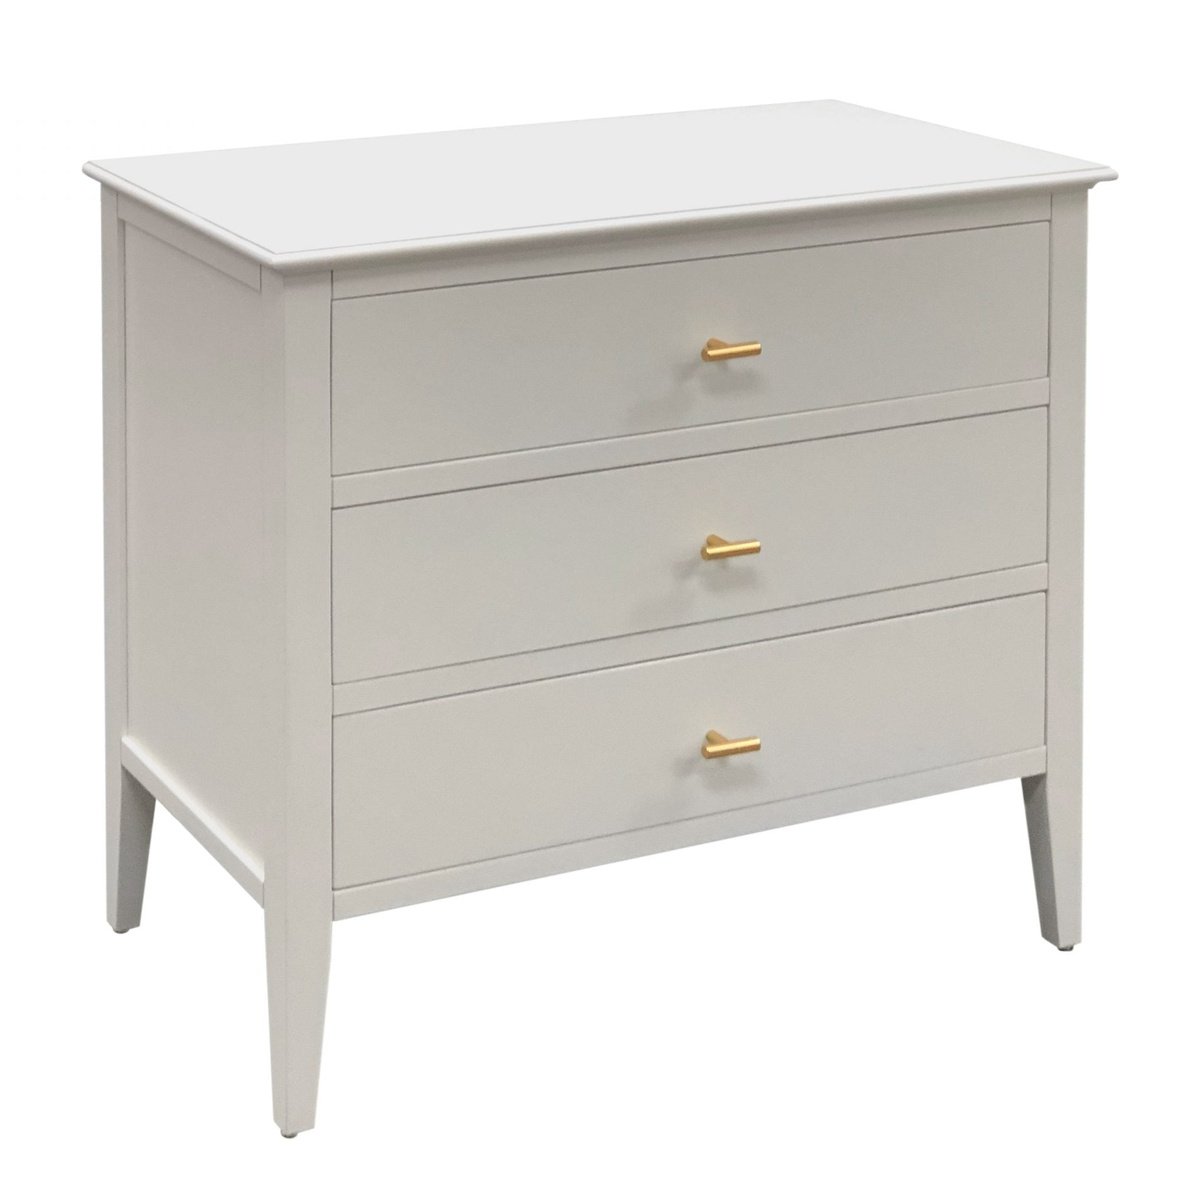 Chilworth Chest of Drawers Grey